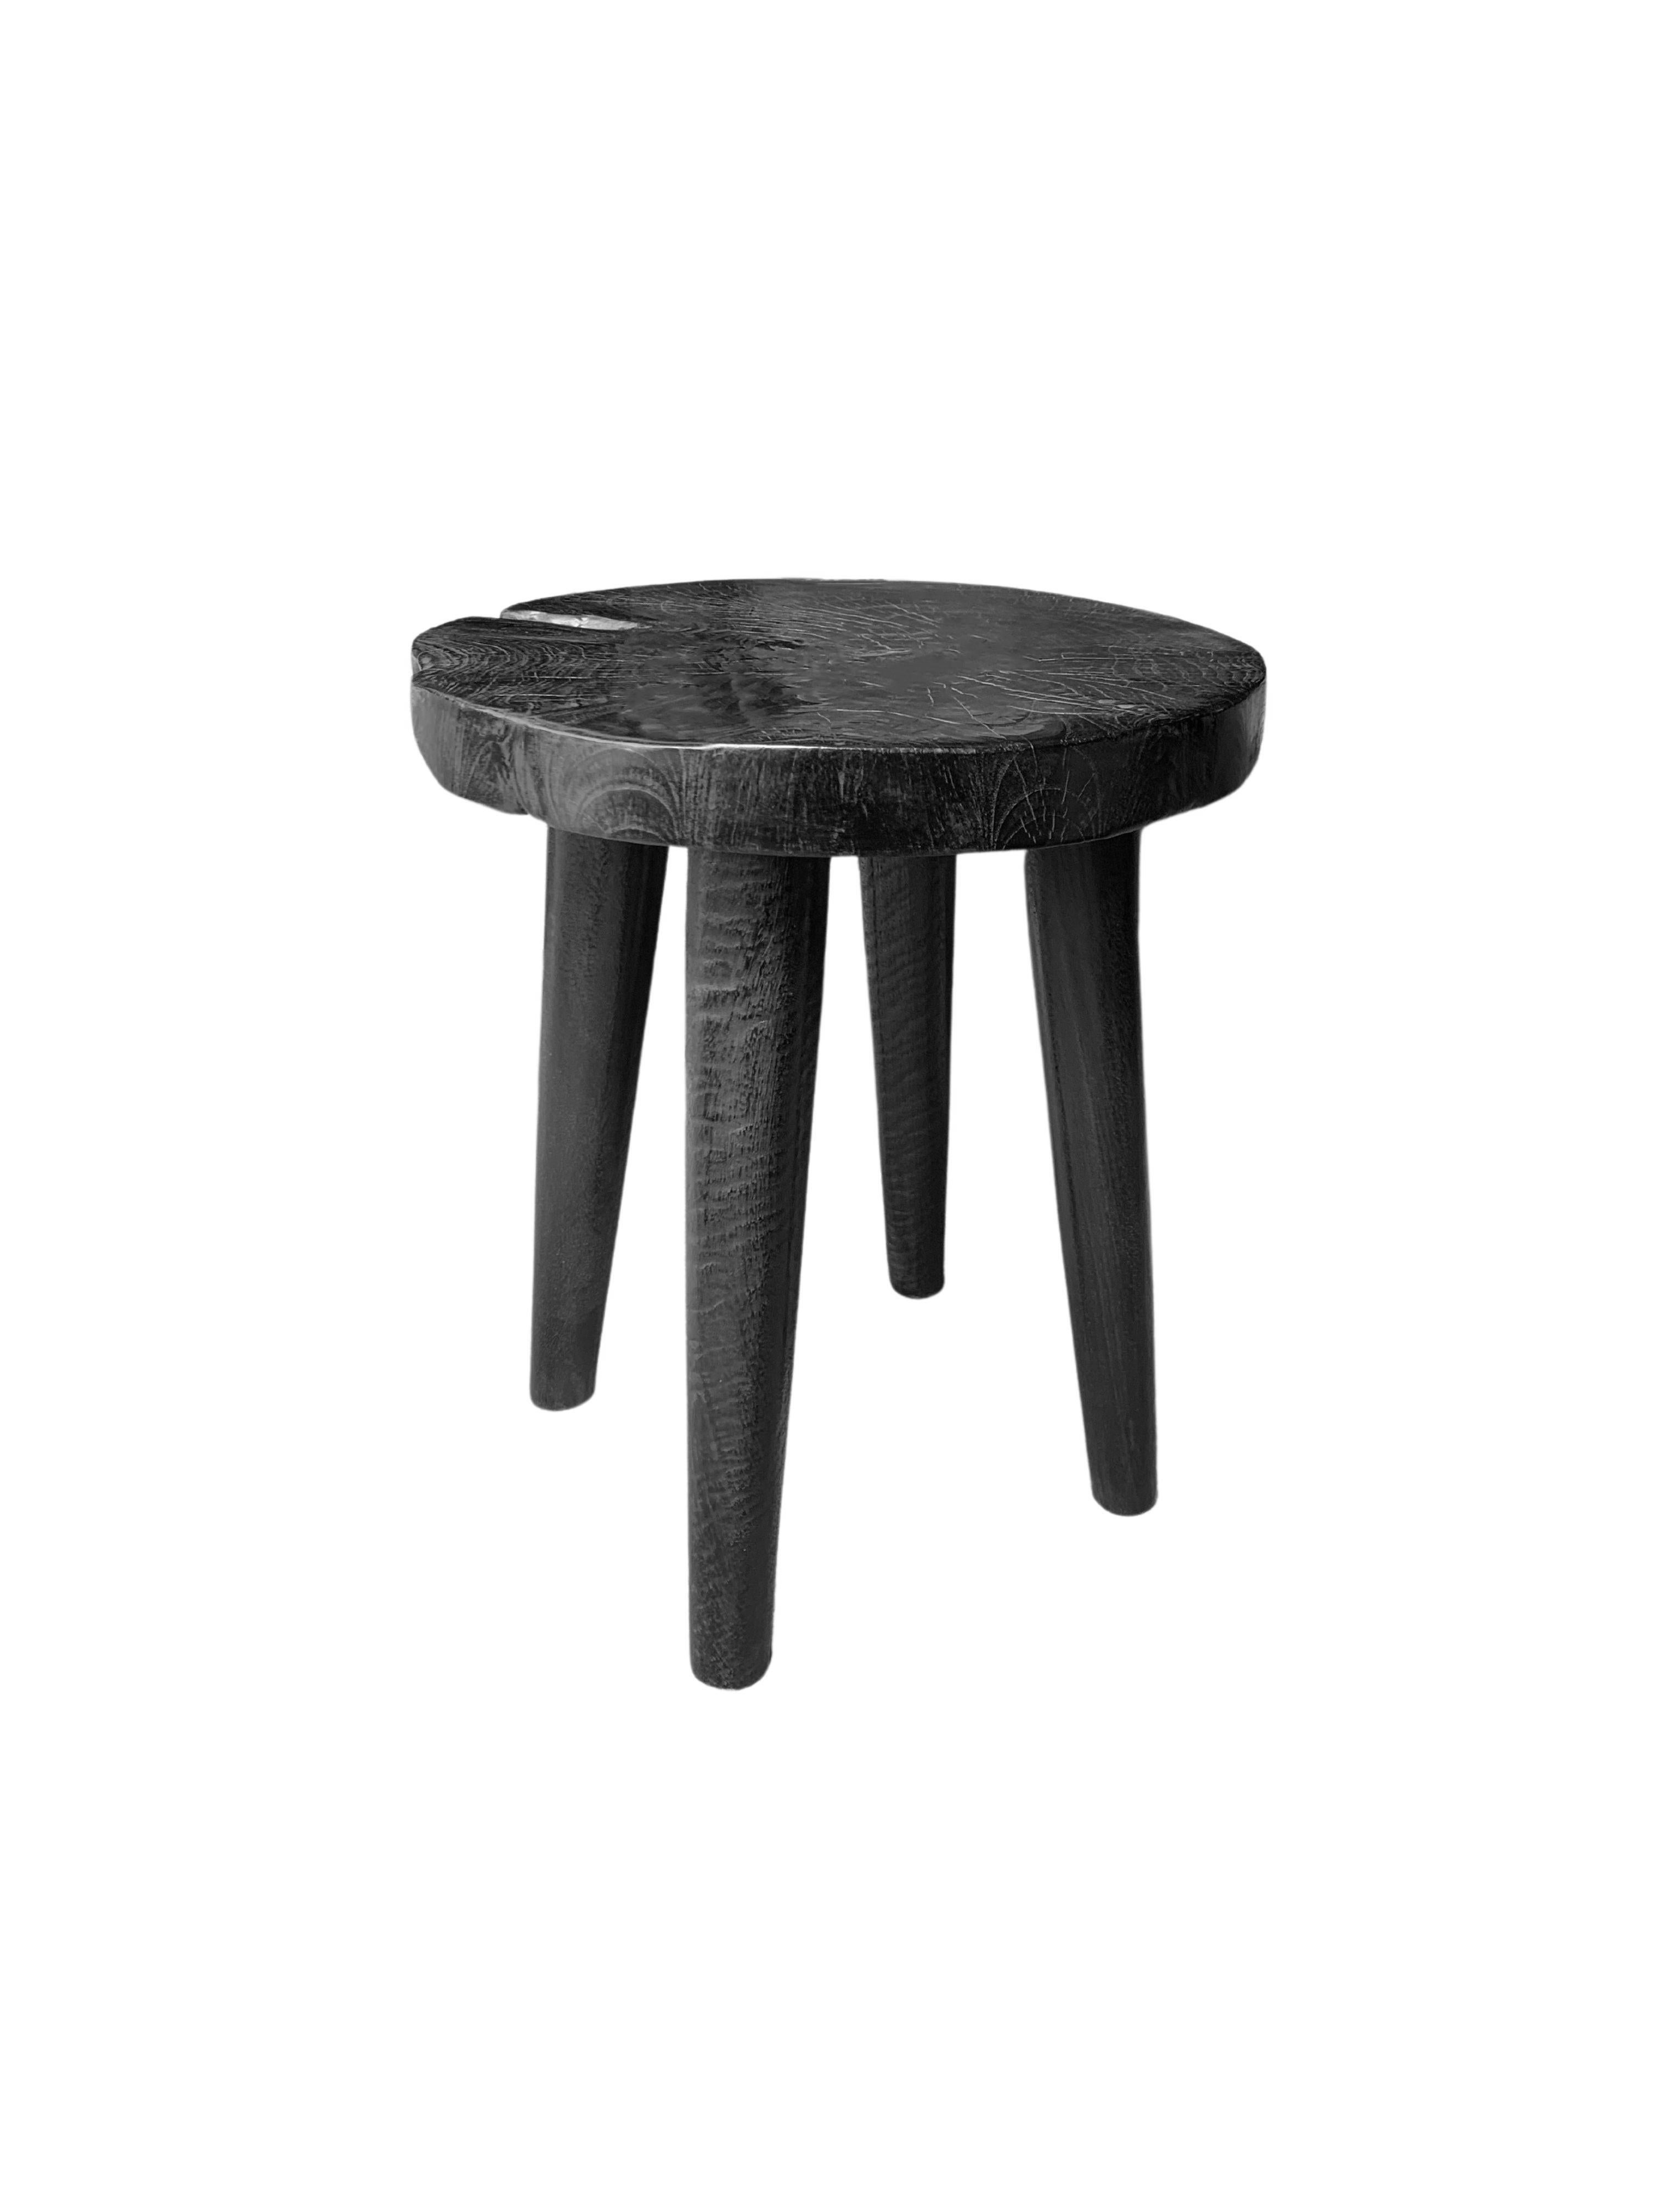 Organic Modern Sculptural Mango Wood Stool with Burnt Finish For Sale